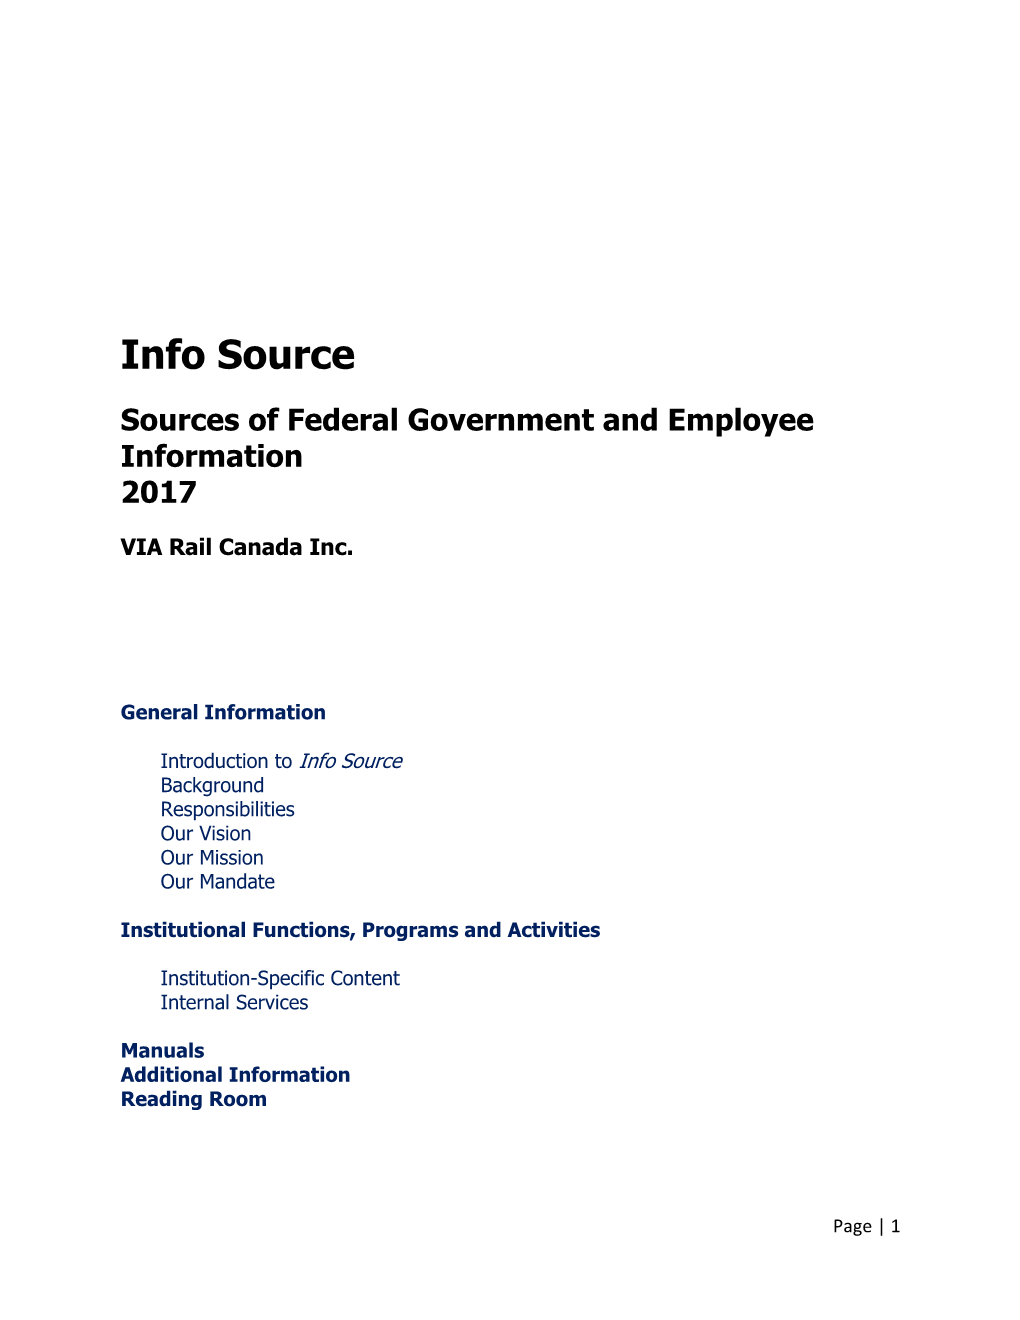 Info Source Sources of Federal Government and Employee Information 2017